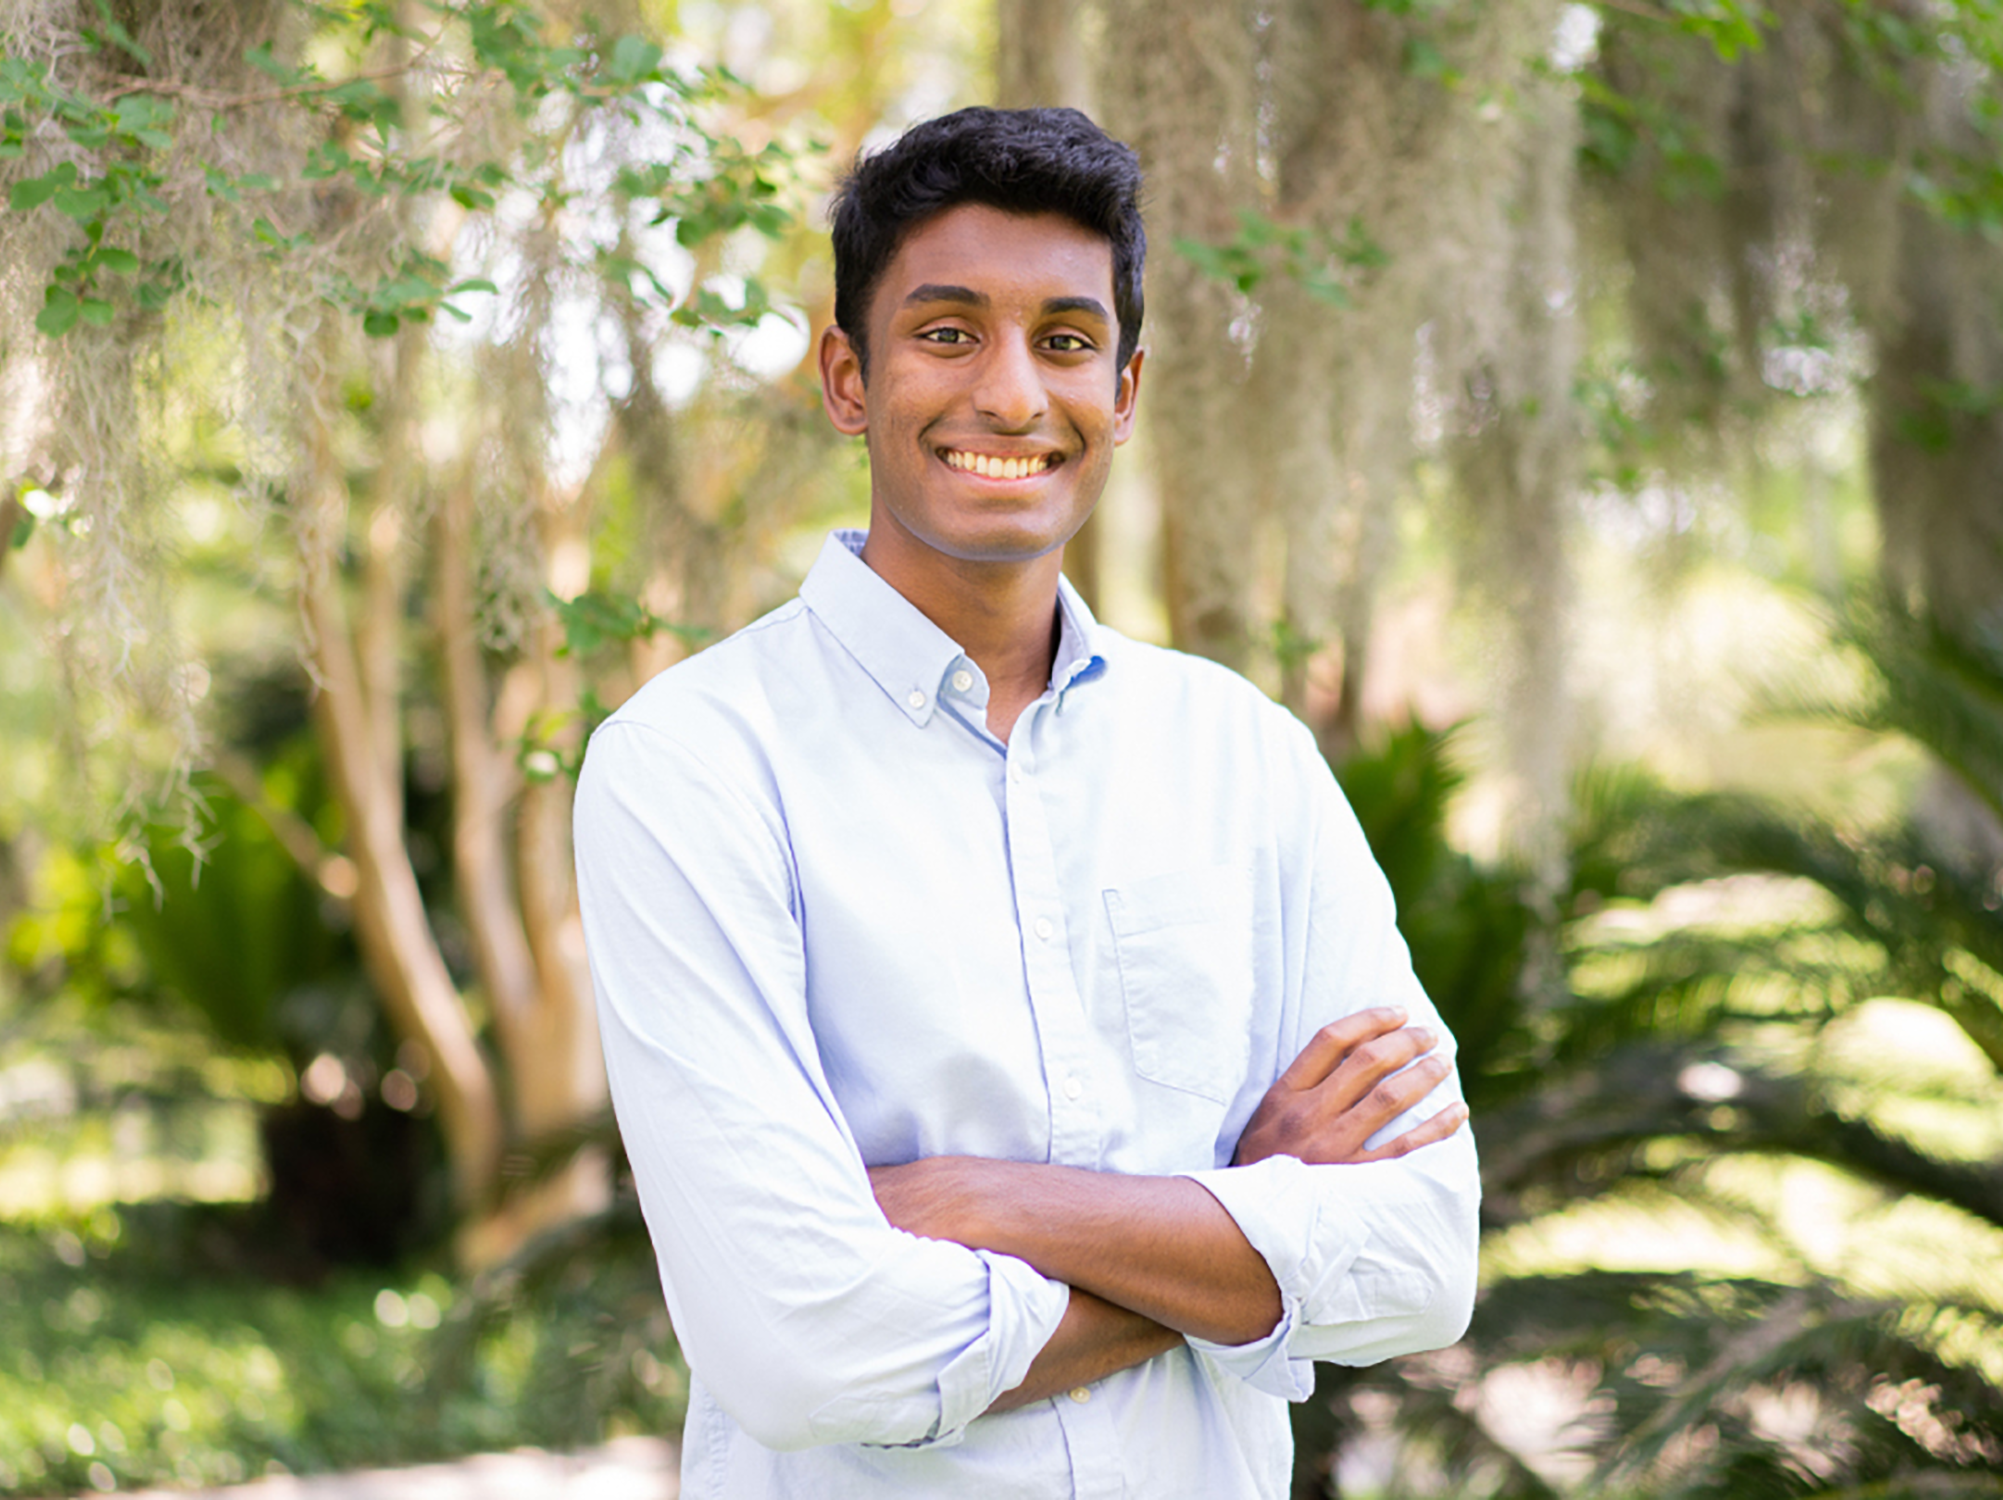 Rising senior selected as Tulane’s first Udall Scholar since 1997